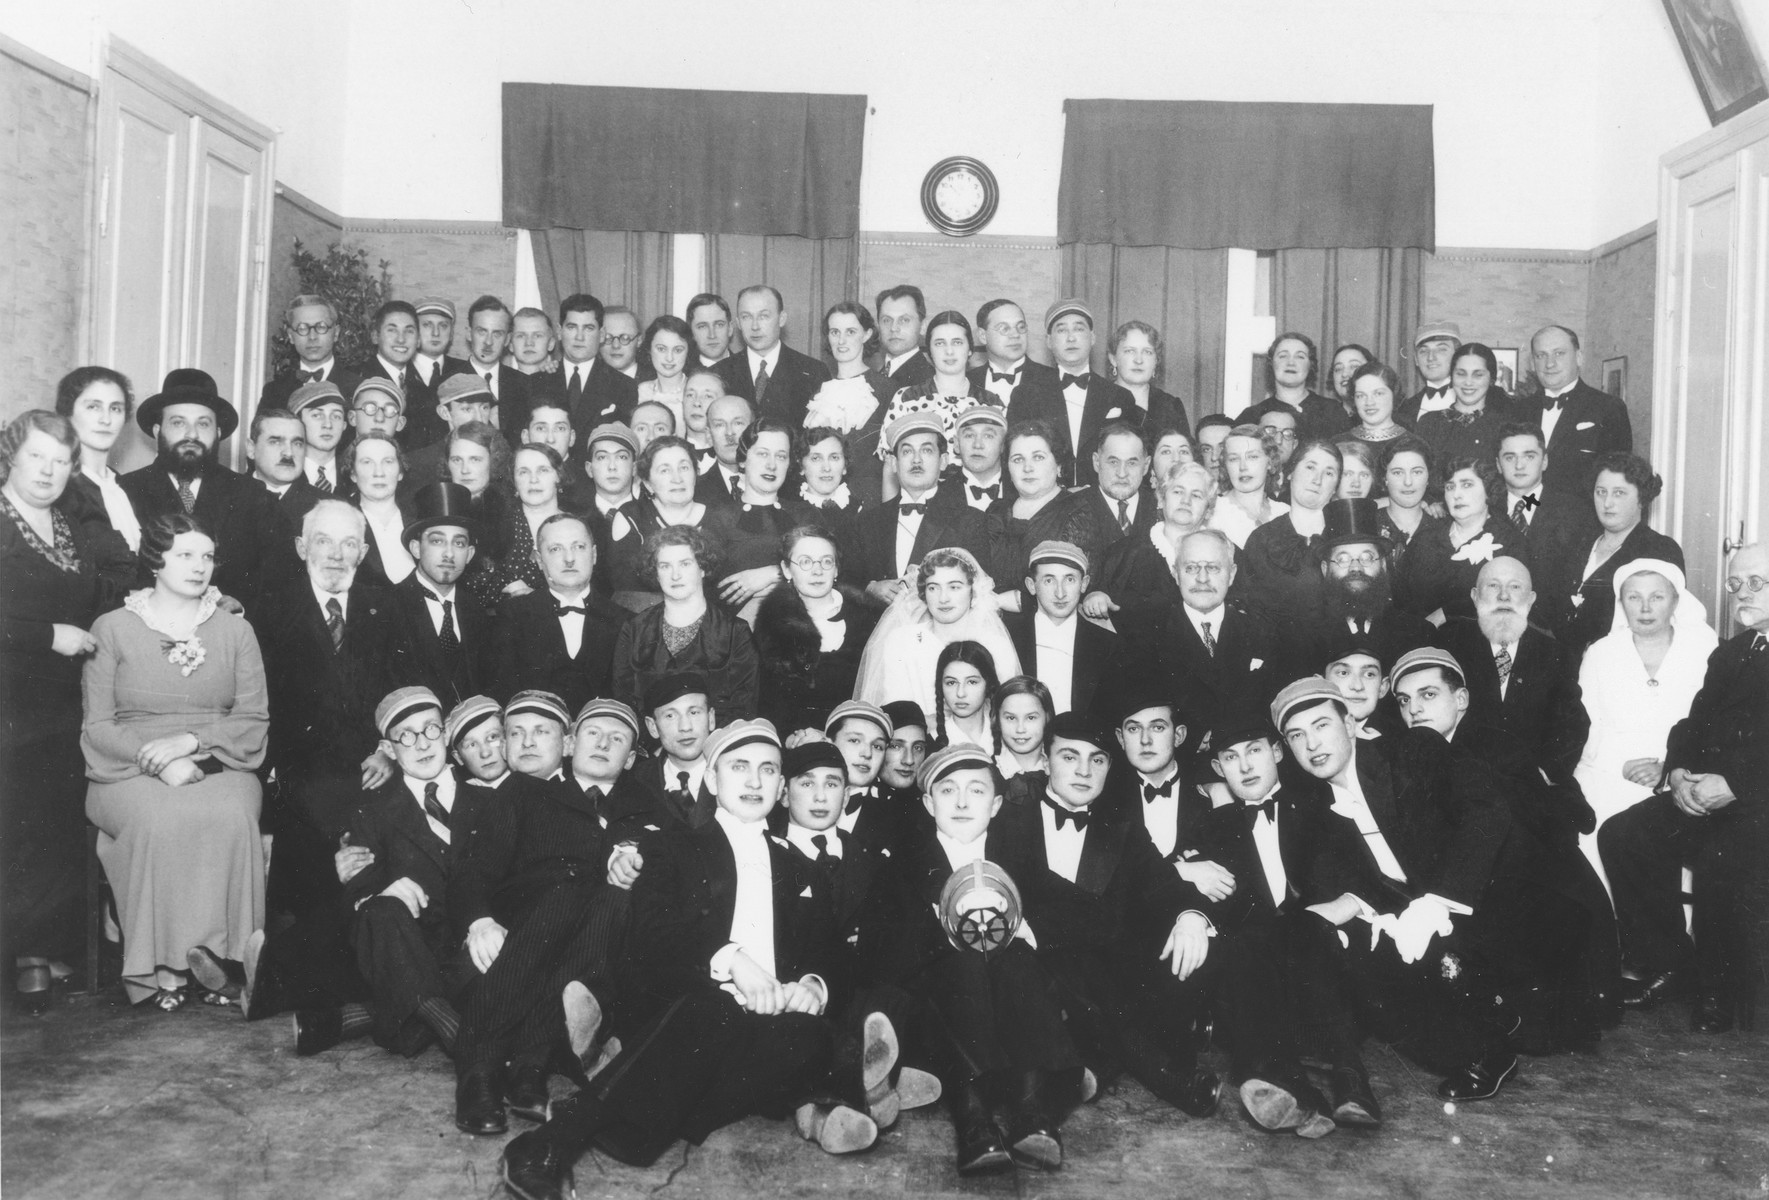 A Jewish bride and groom pose among a large group of family and friends at their wedding.

Many of the men are wearing the caps of a Jewish fencing club.